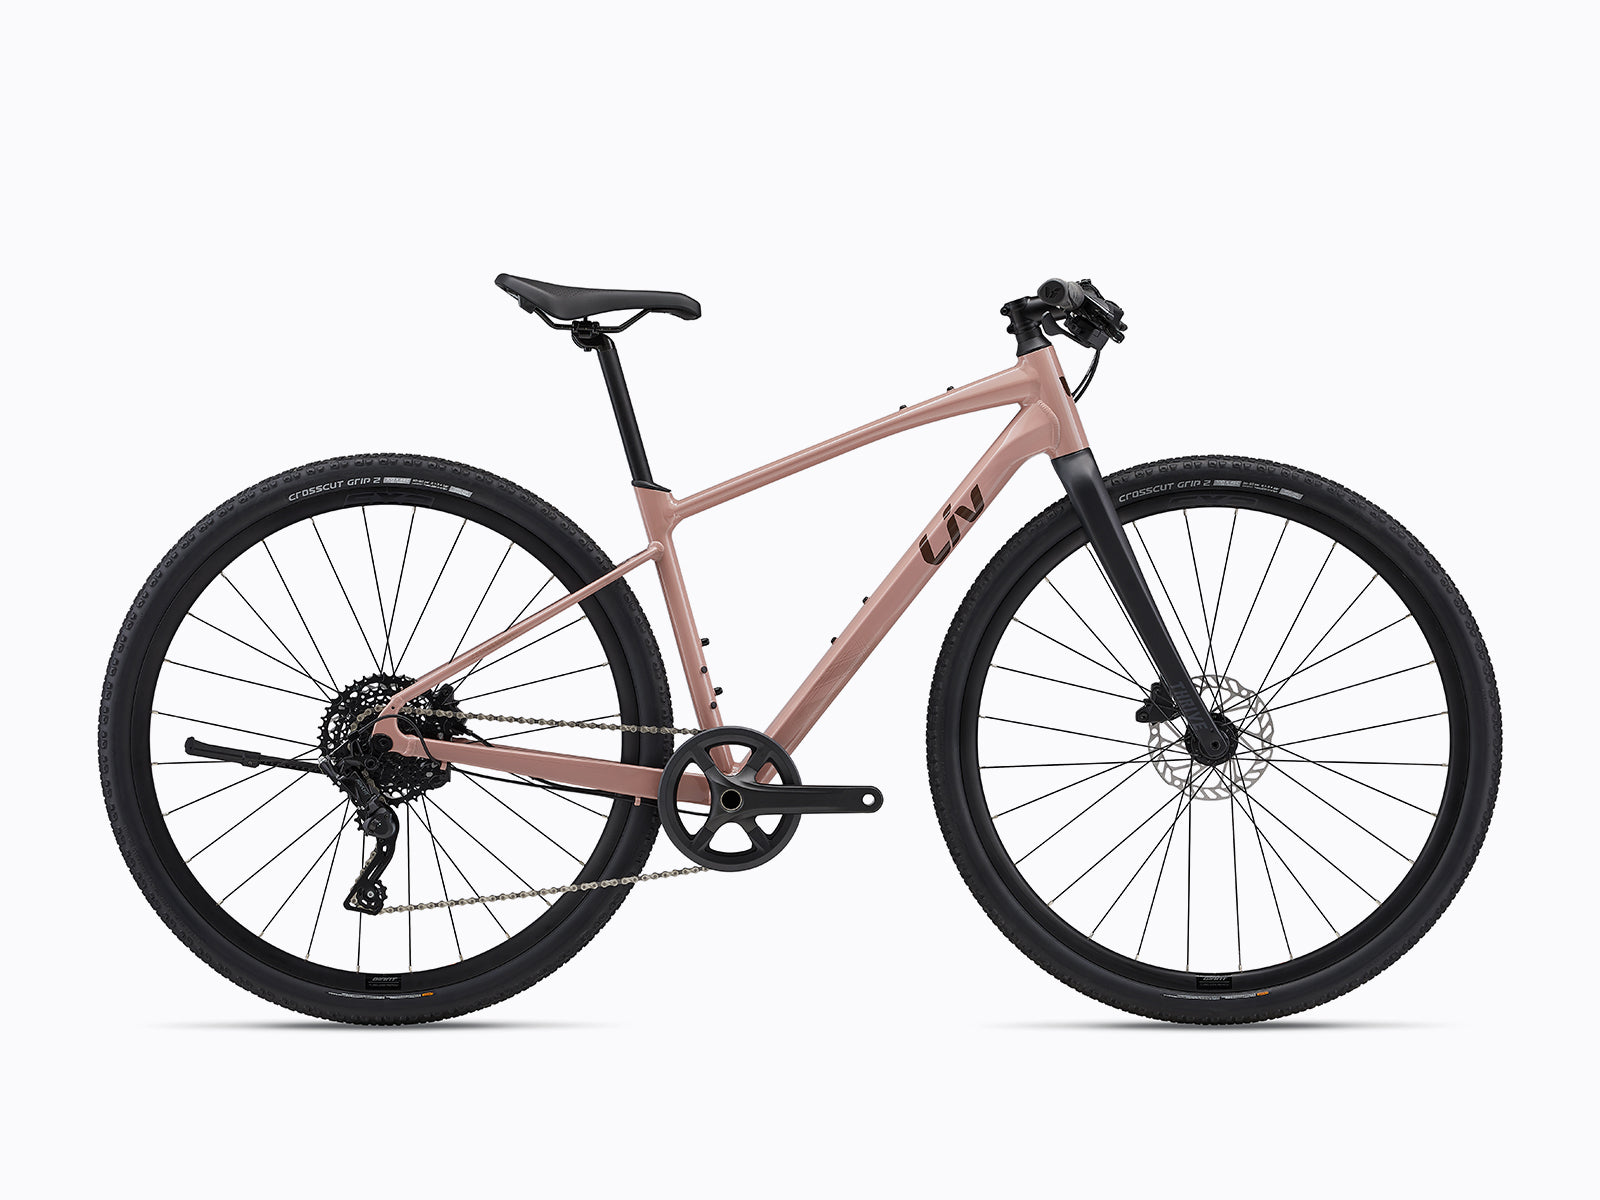 Image features Liv thrive GX, a women bike sold by Giant Melbourne, a bike store in Australia